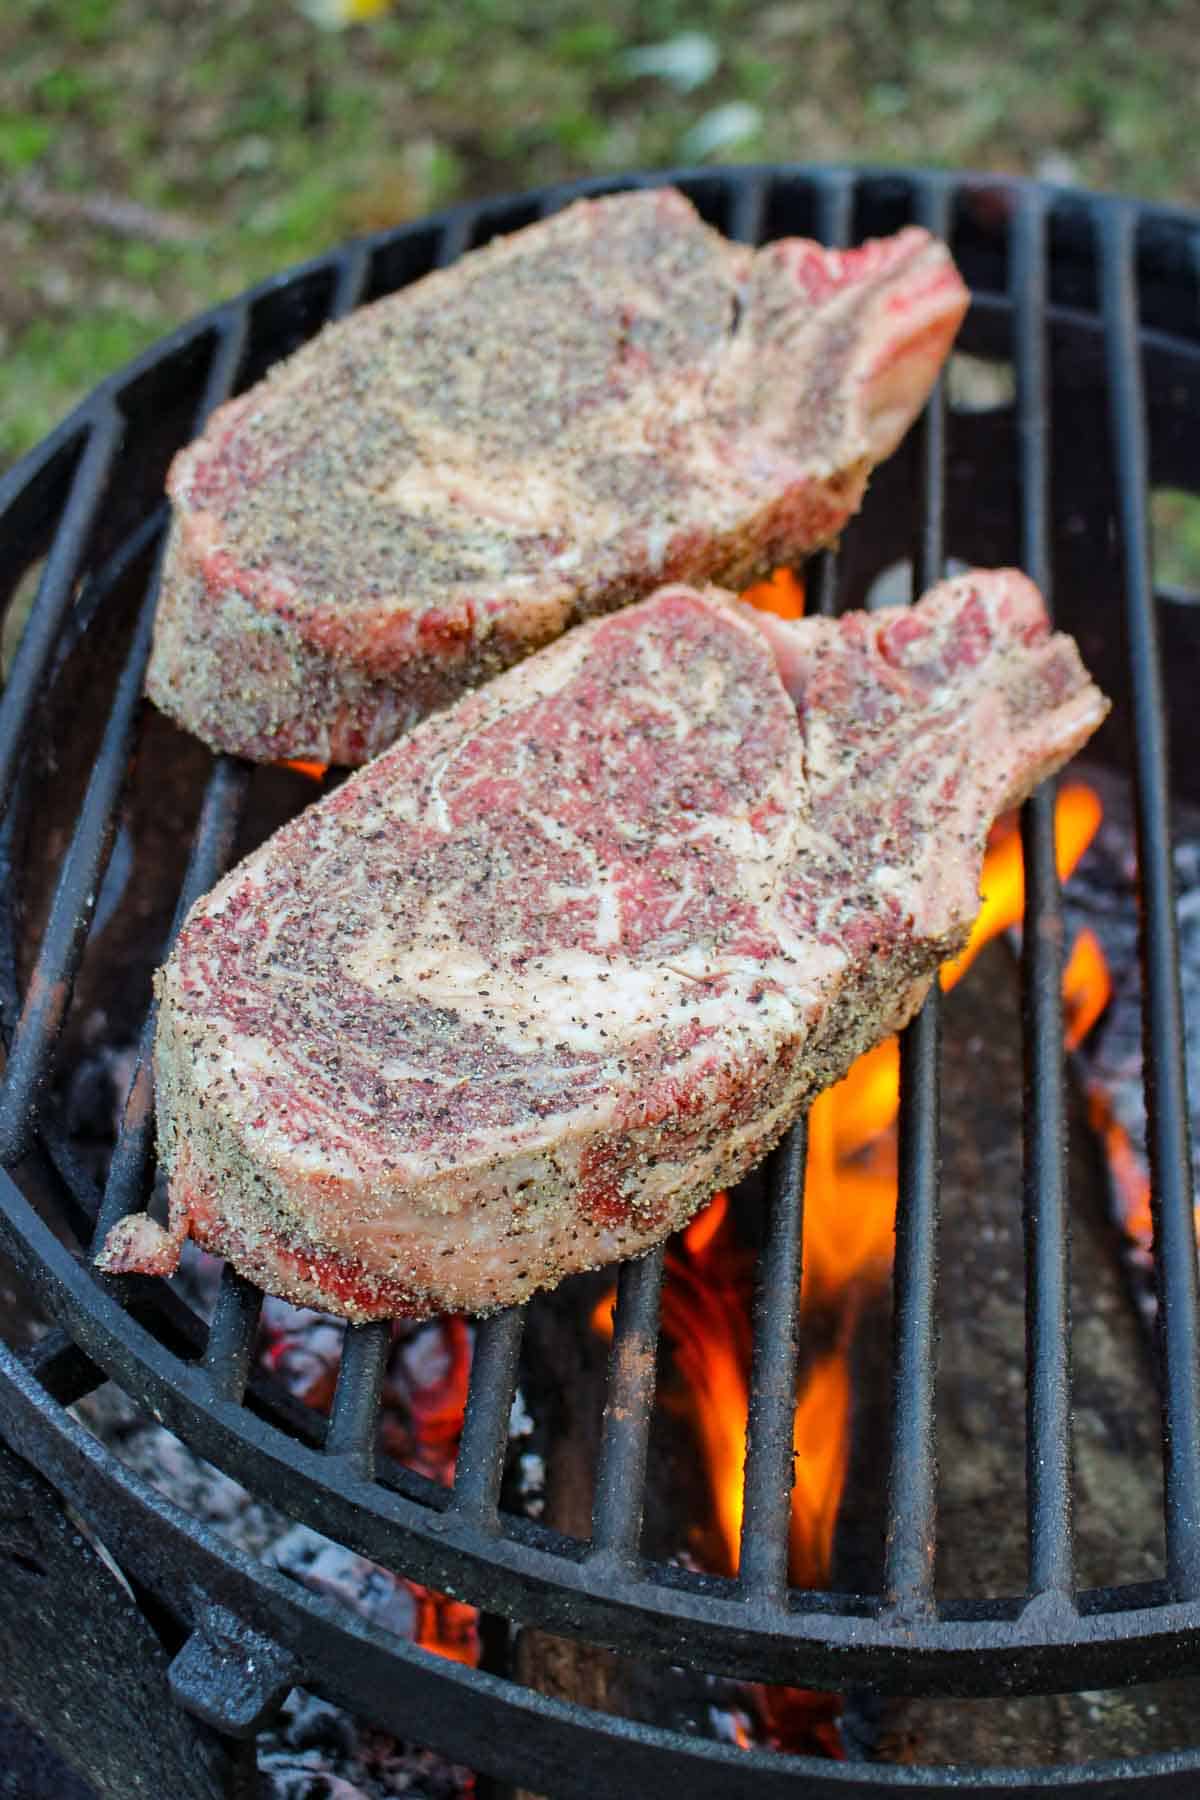 The raw Cowboy Steaks getting placed on the grill.